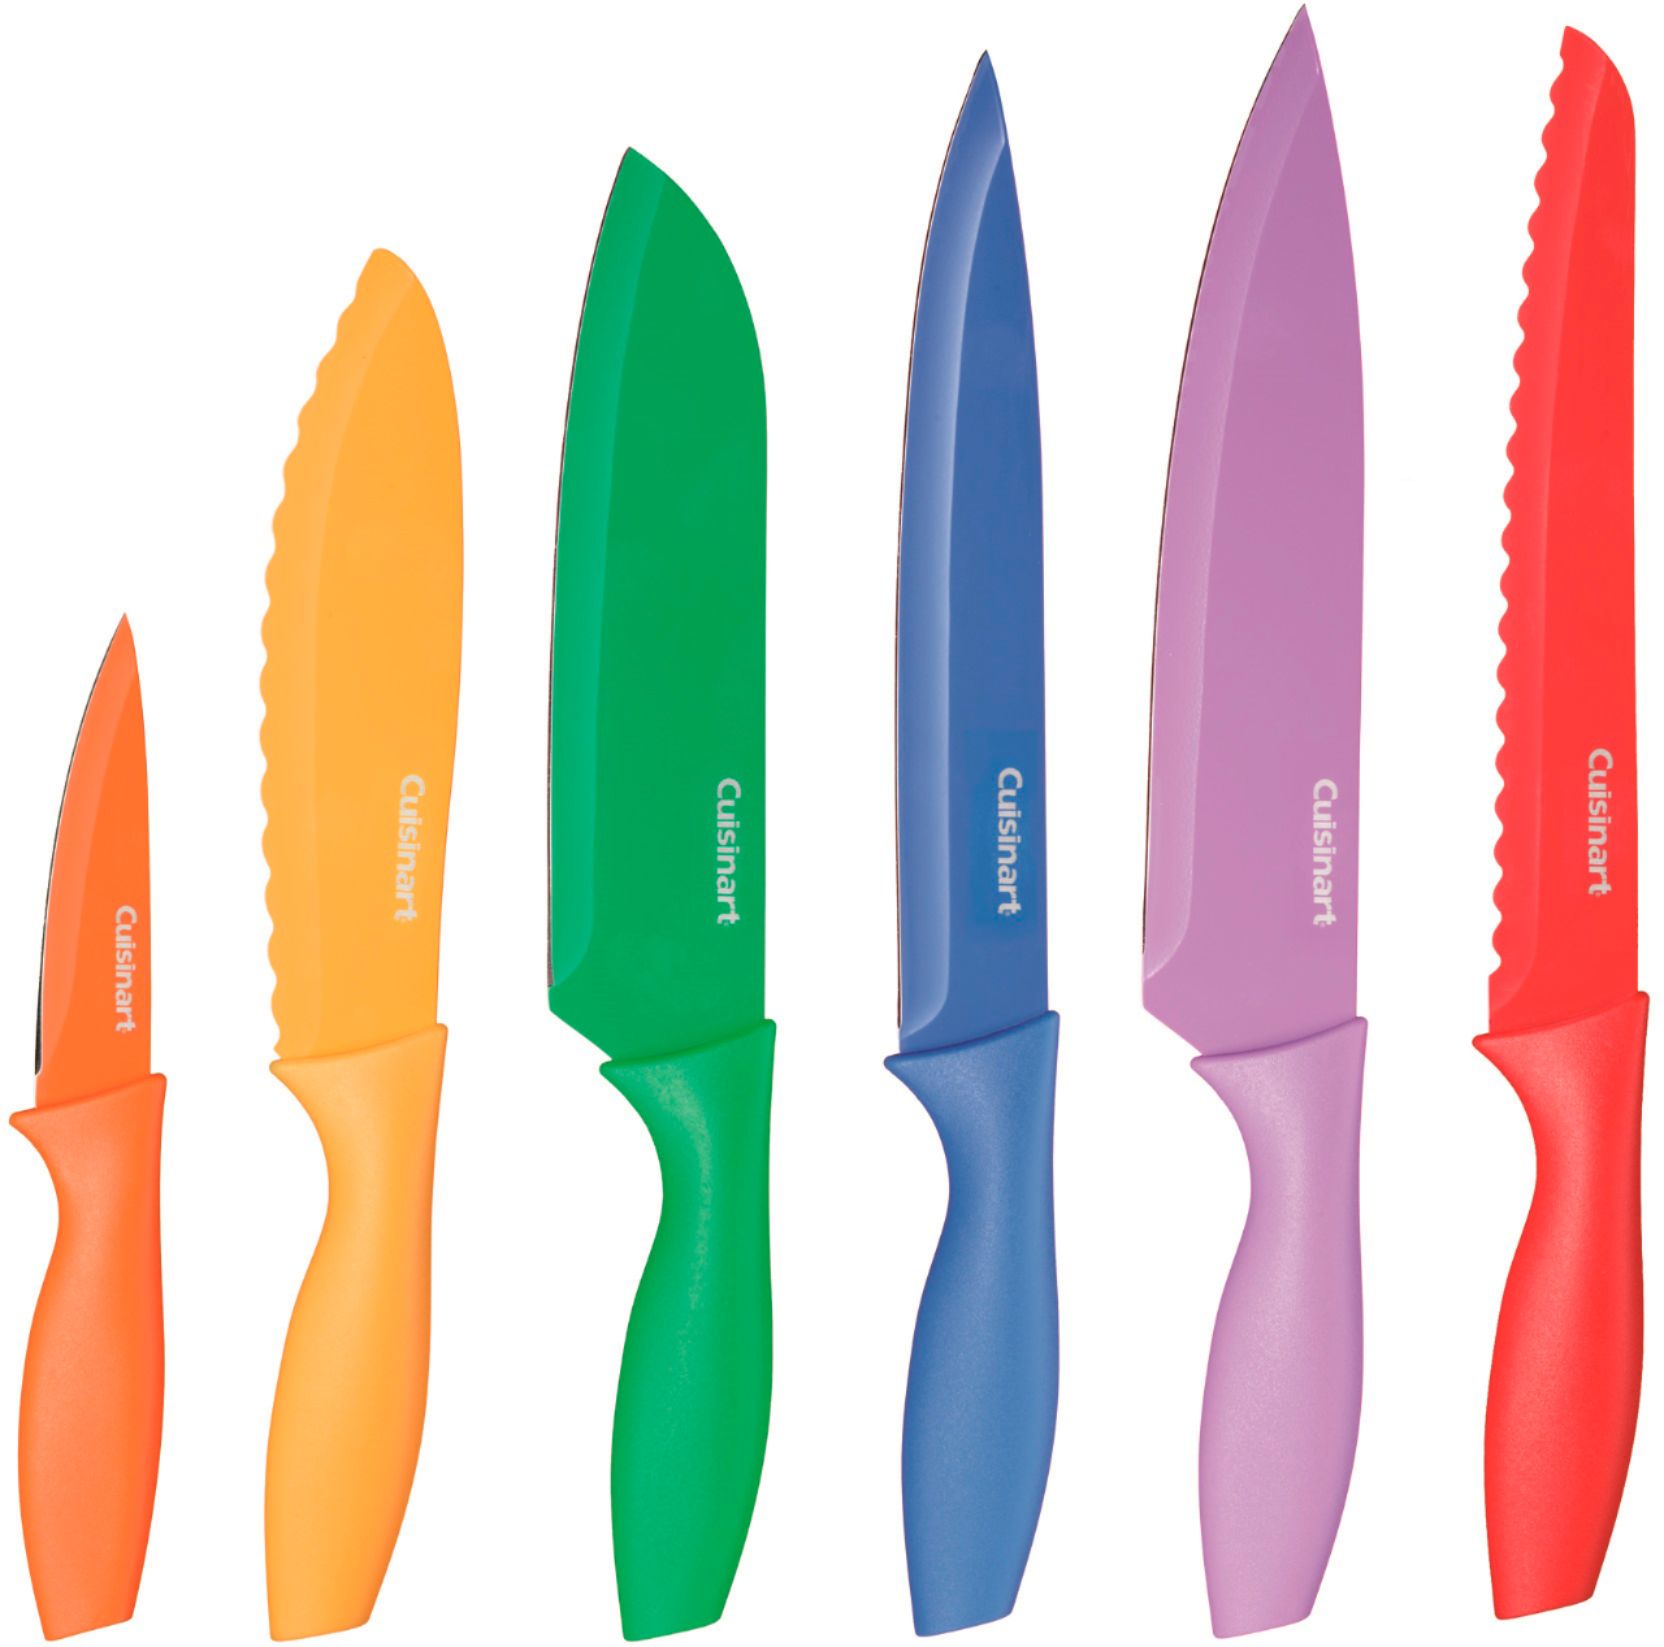 12-Piece Cuisinart Stainless Steel Knife Set (6-Knives & 6-Covers) $15 + Free Shipping